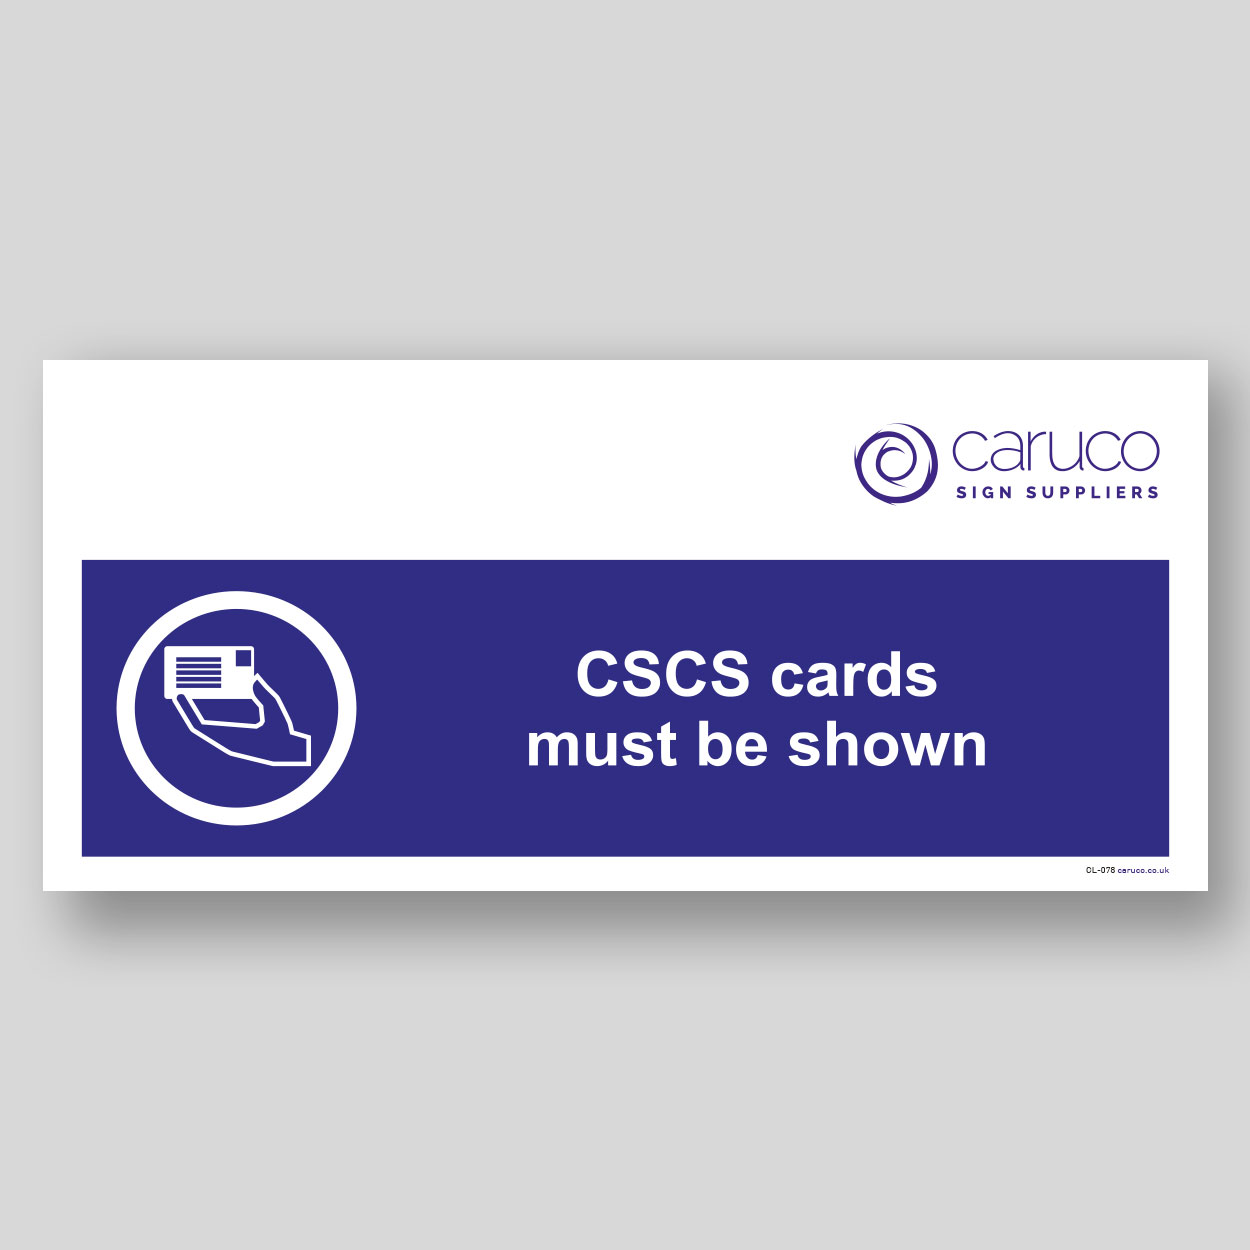 CL-078 CSCS cards must be shown